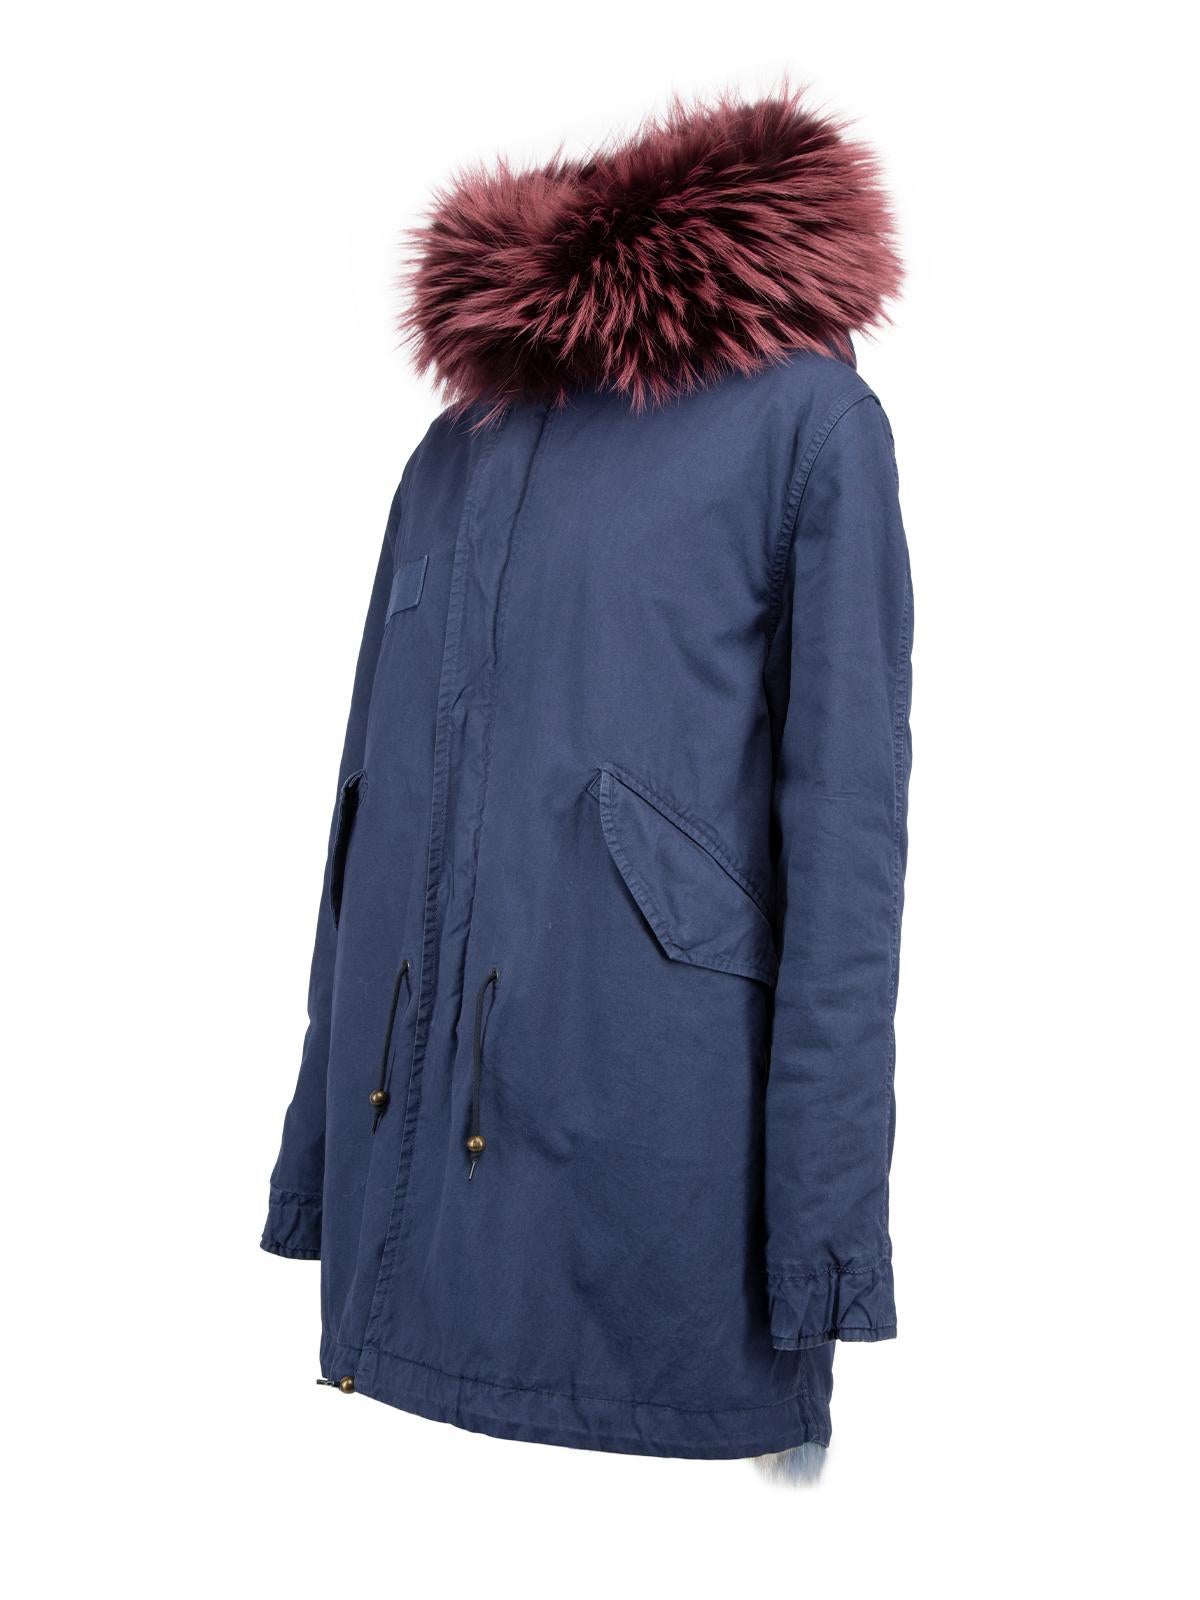 Women's Mr & Mrs. Italy Fur Lined Parka with Hood Size S